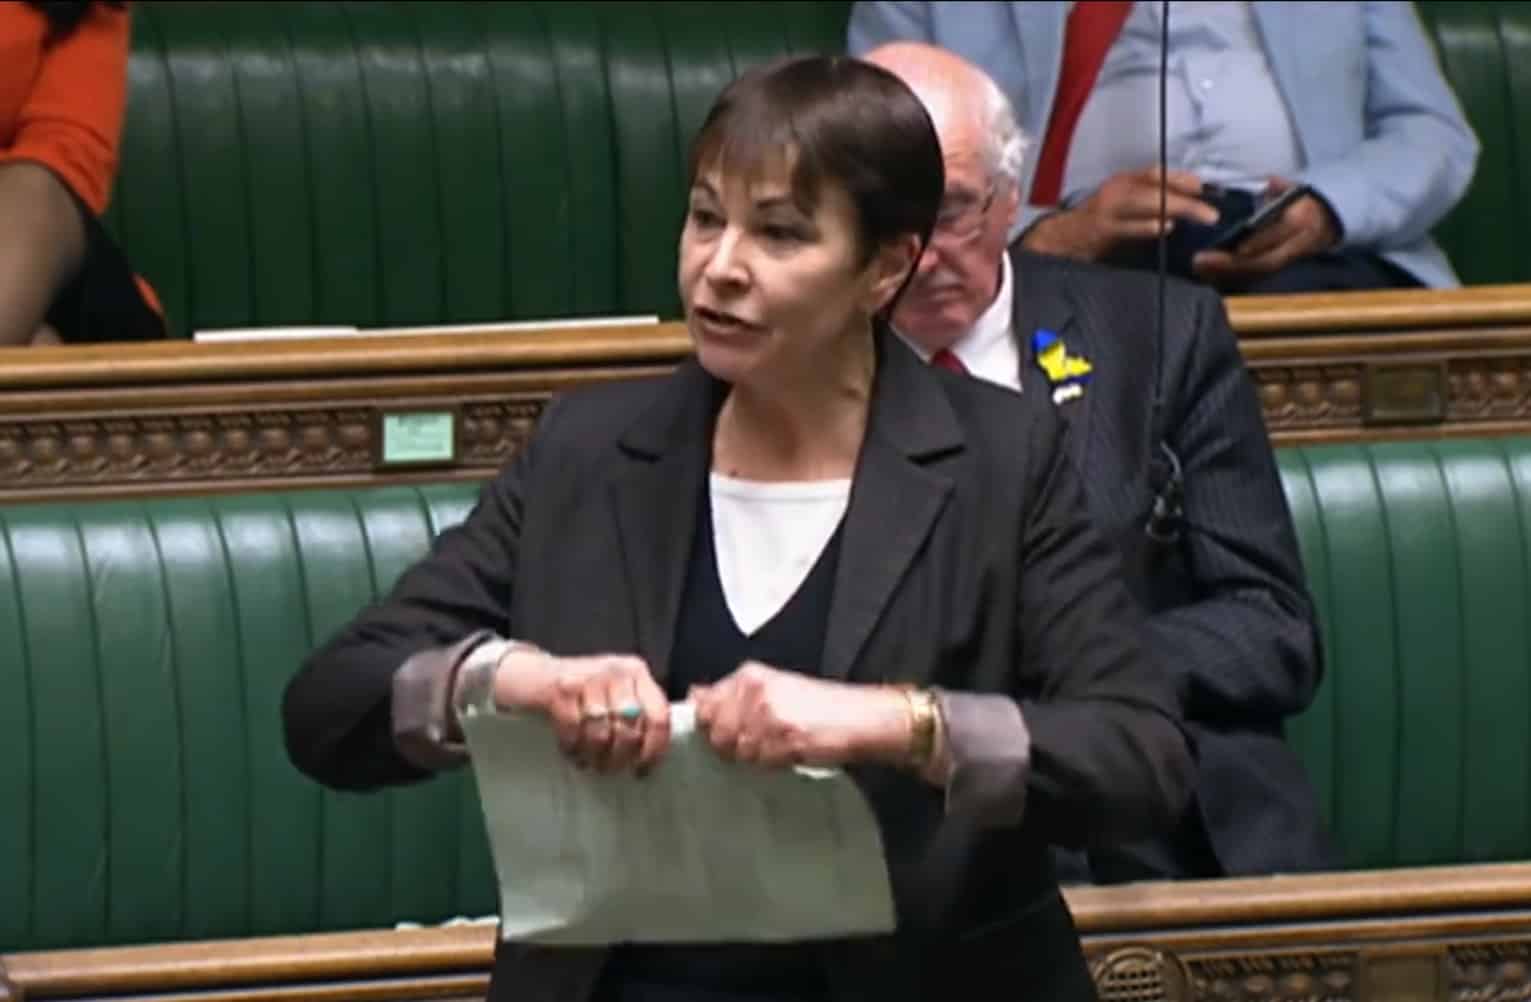 Watch: Caroline Lucas rips up Illegal Immigration Bill in parliament